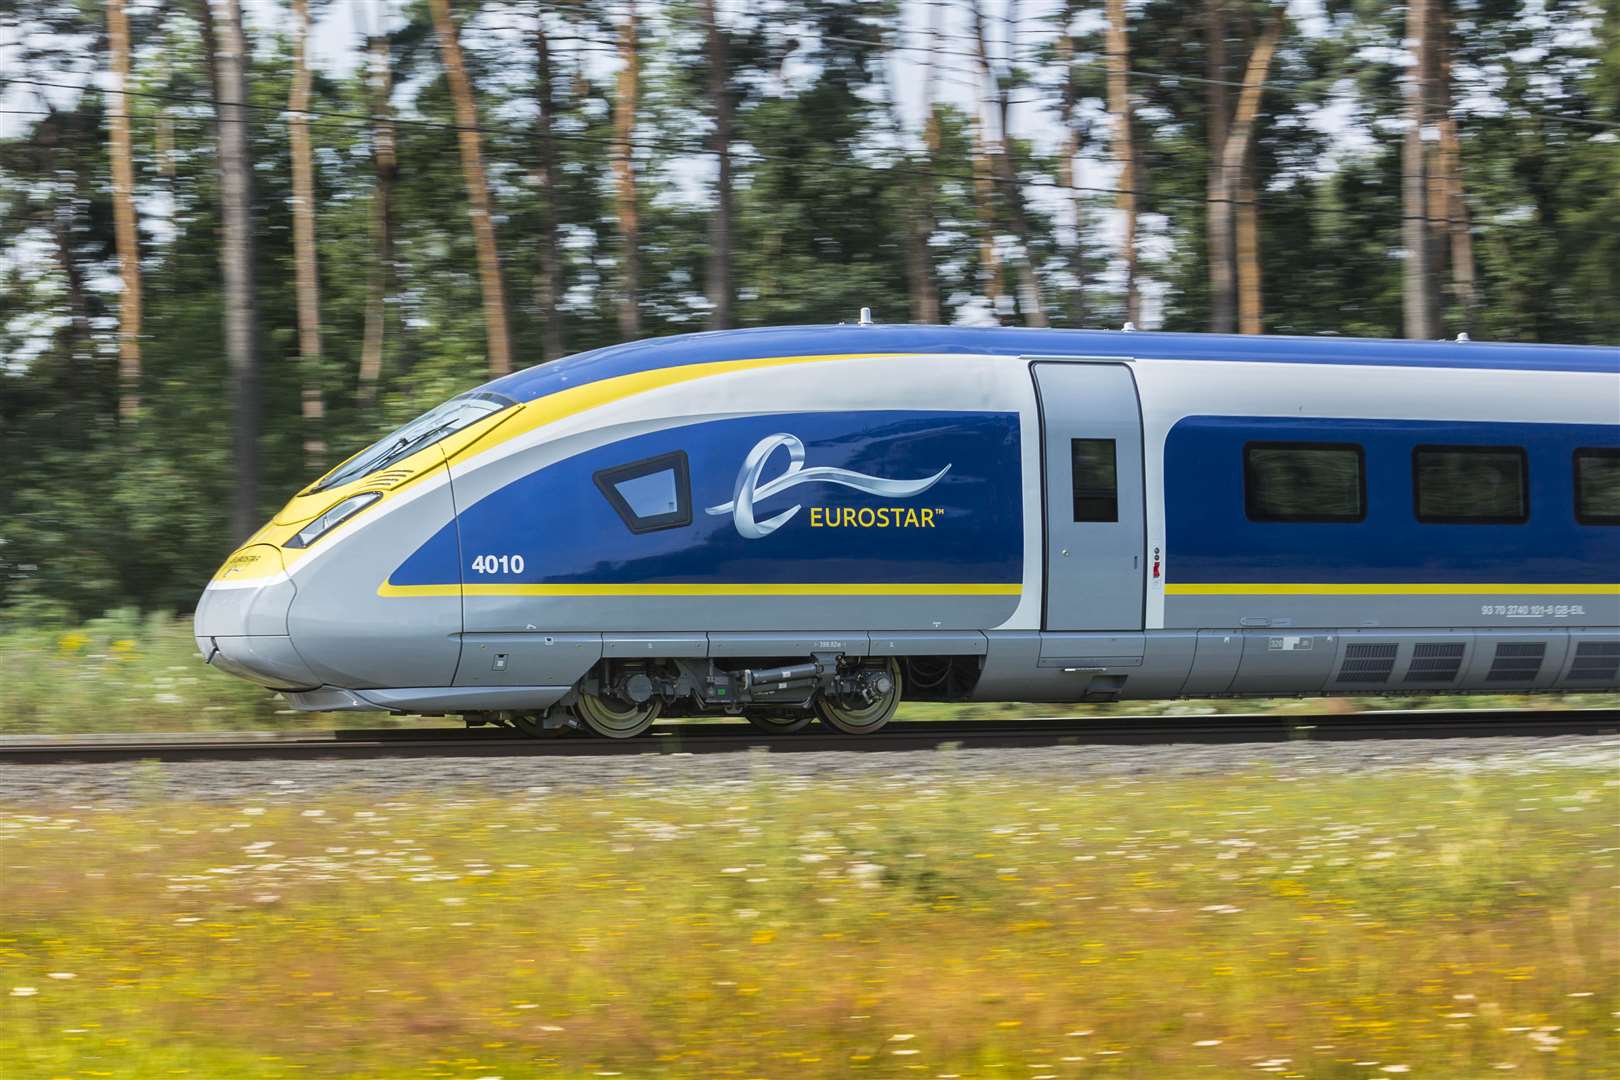 A new Eurostar route has been announced